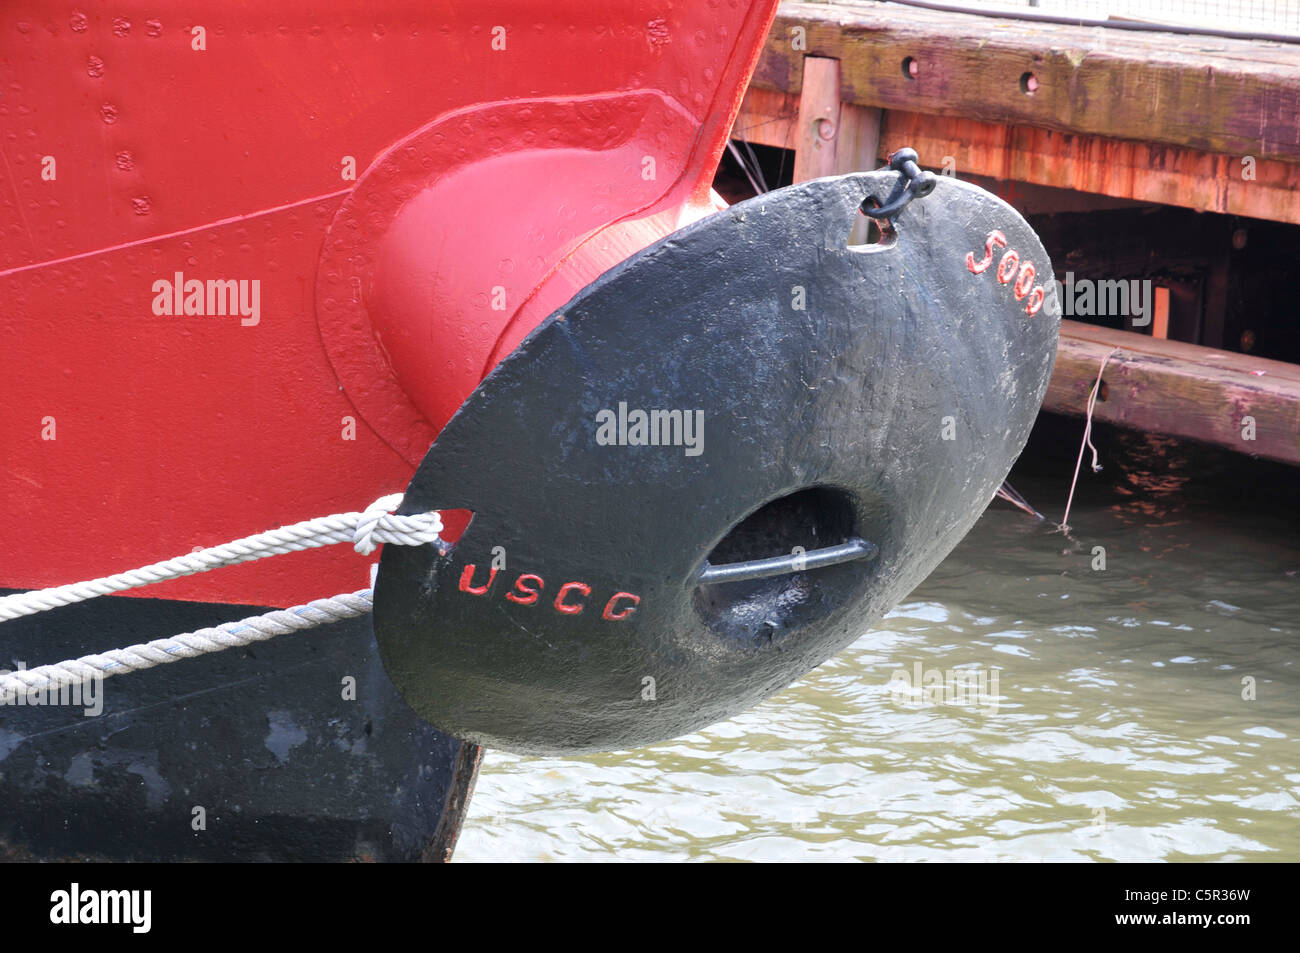 Detail of ship with black anchor and red shipboard, South Street Seaport, Manhattan, New York, NY, USA Stock Photo